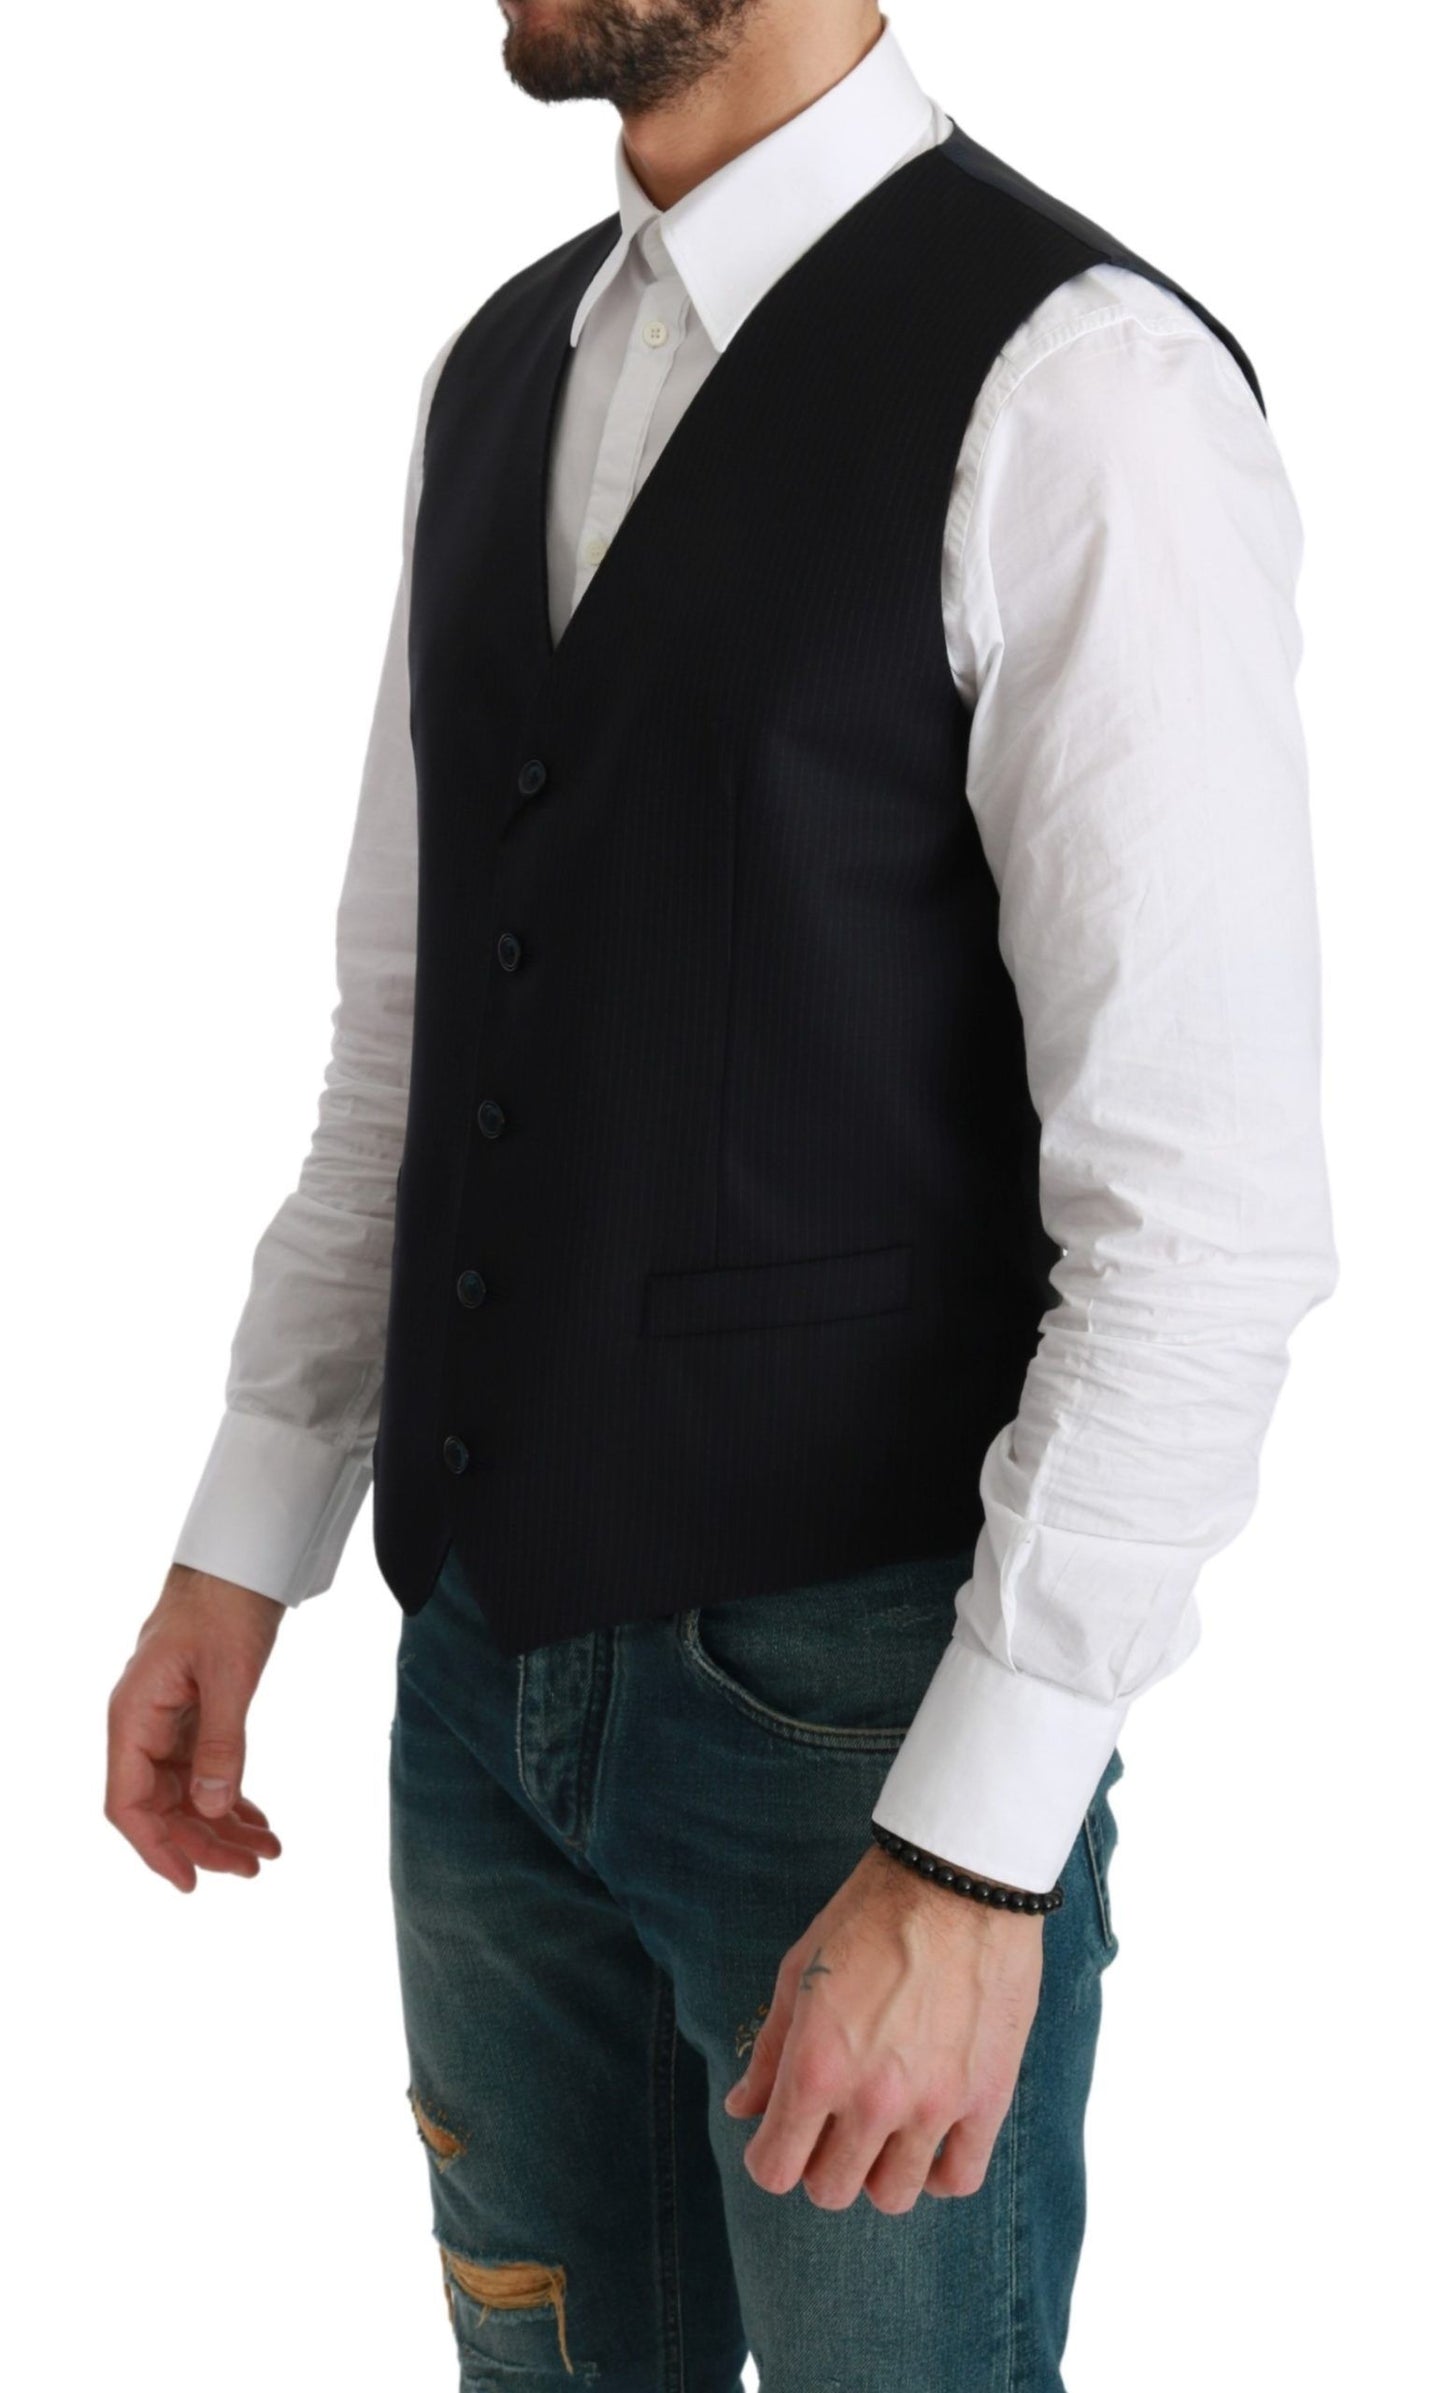 Blue Waistcoat Formal Stretch Wool Vest - Designed by Dolce & Gabbana Available to Buy at a Discounted Price on Moon Behind The Hill Online Designer Discount Store